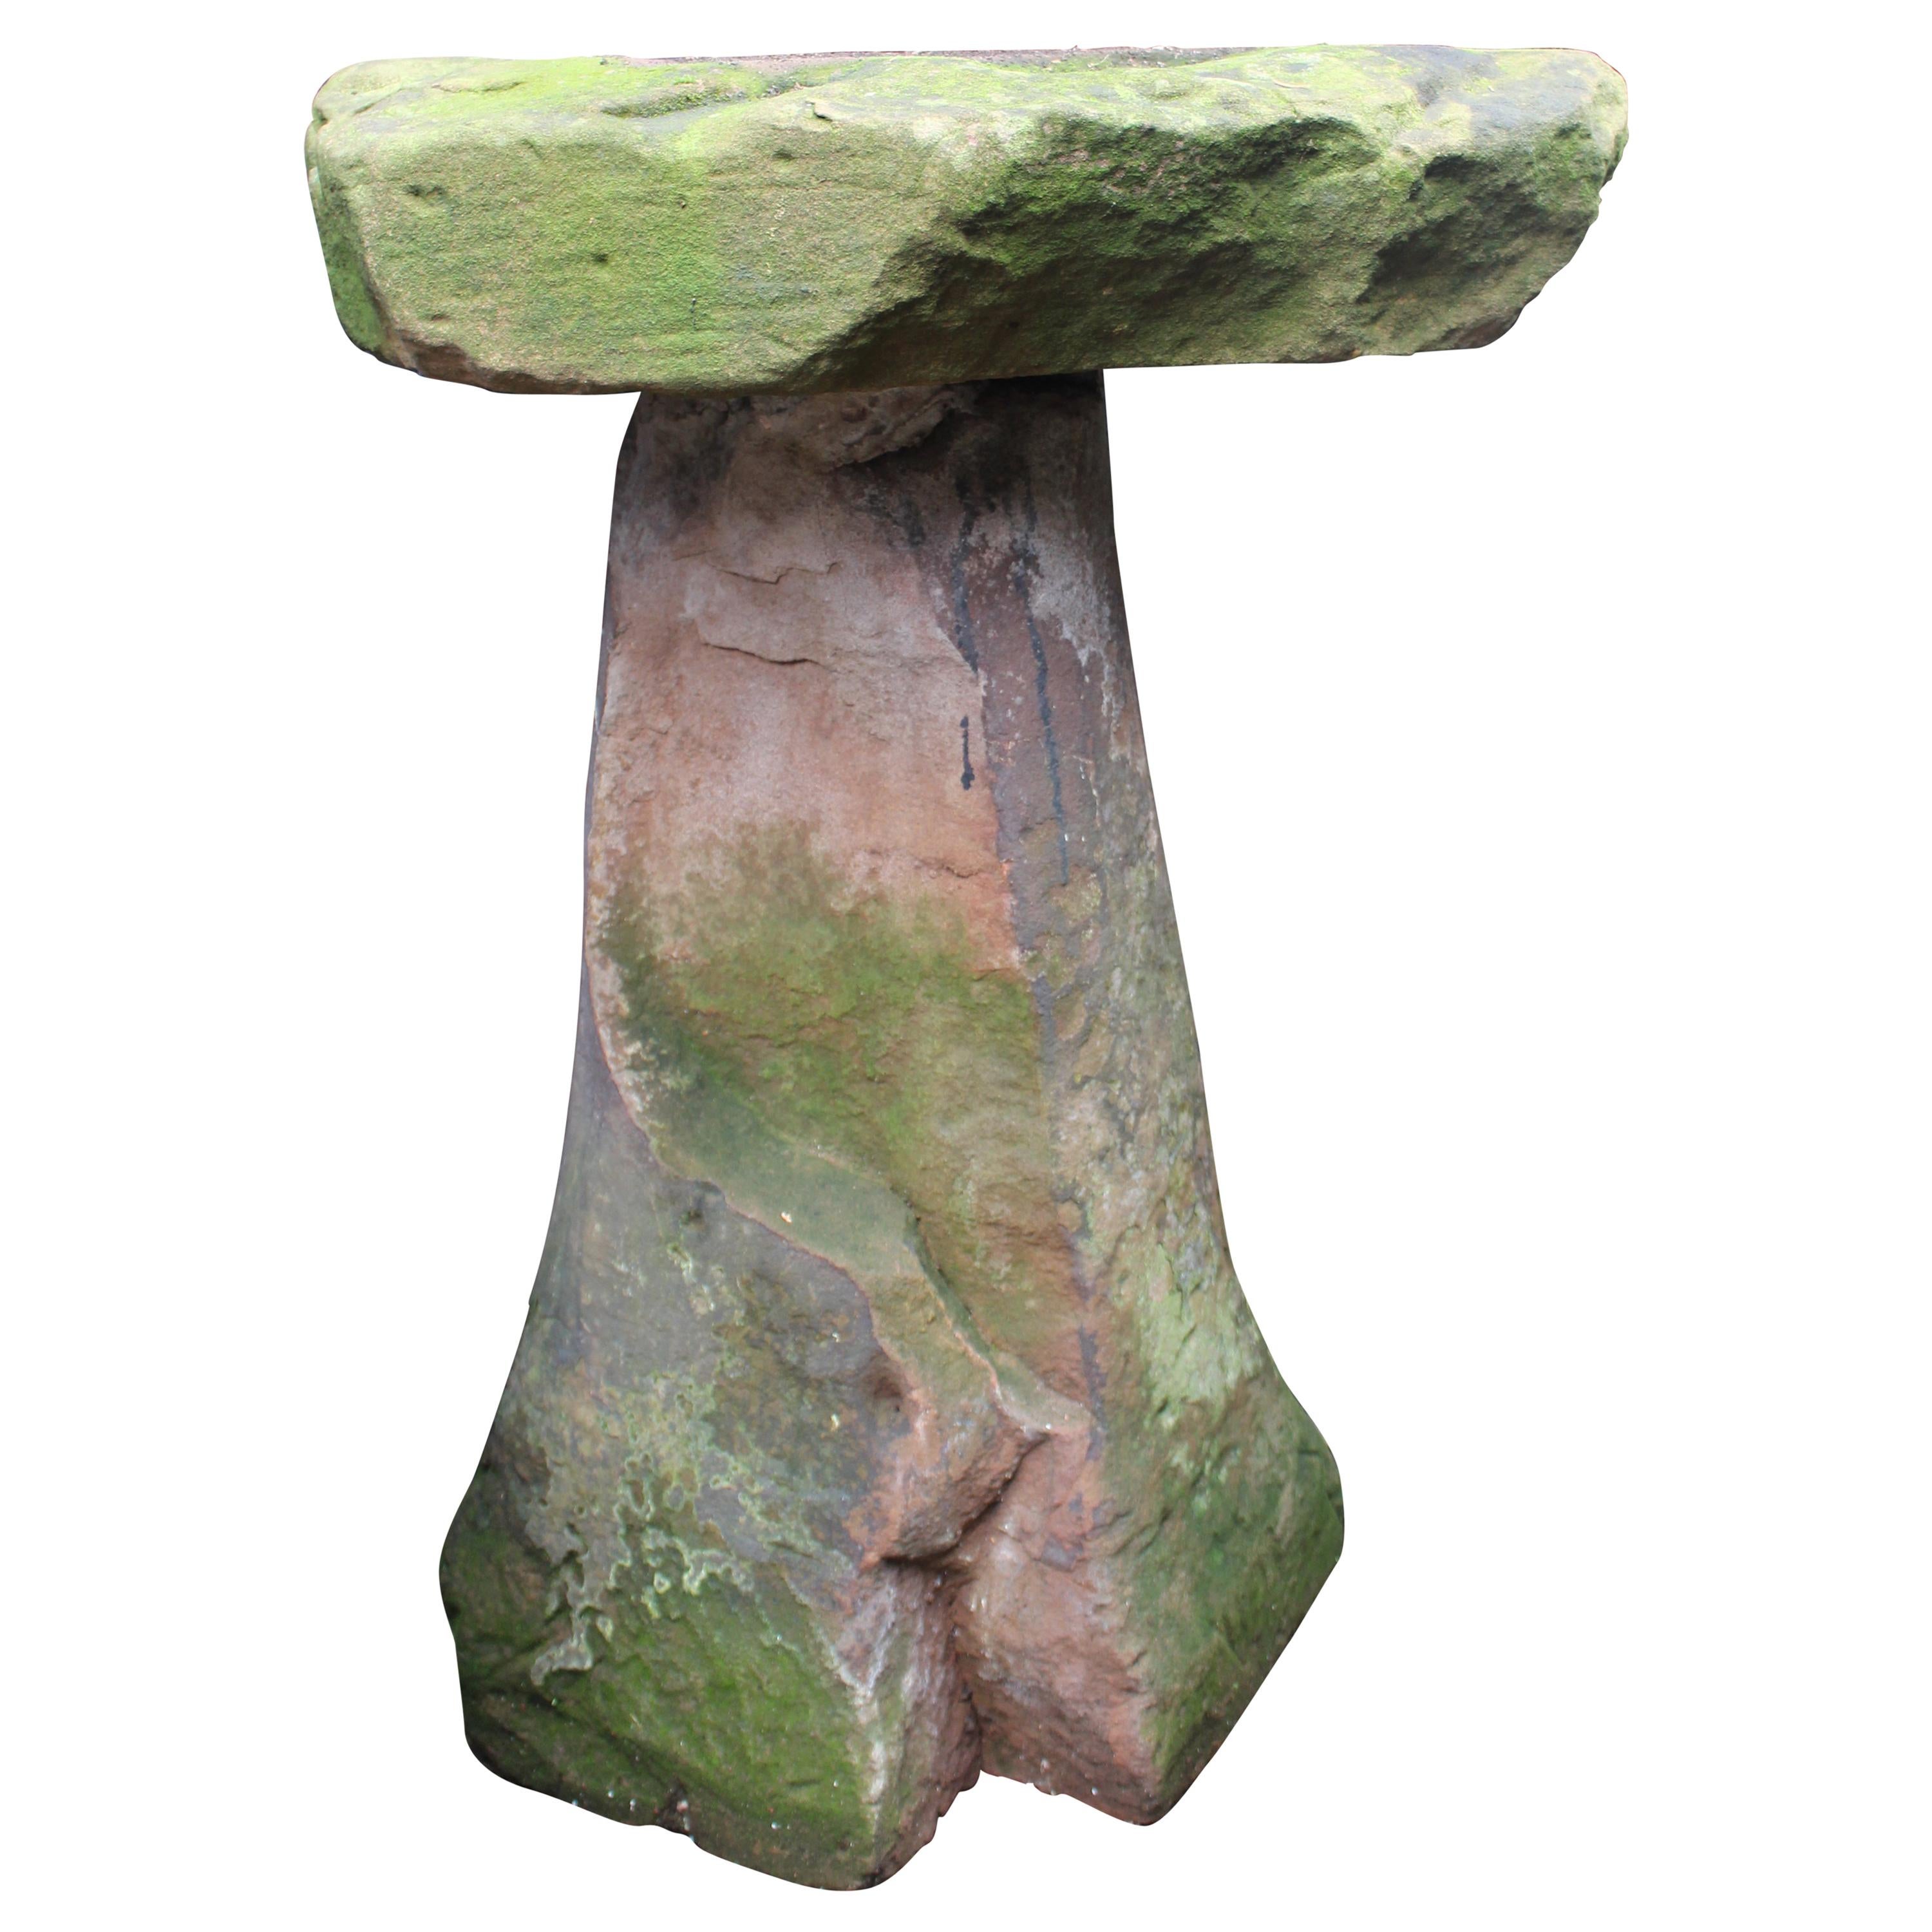 Very Heavy Antique Stone Staddle Stone Mushroom For Sale